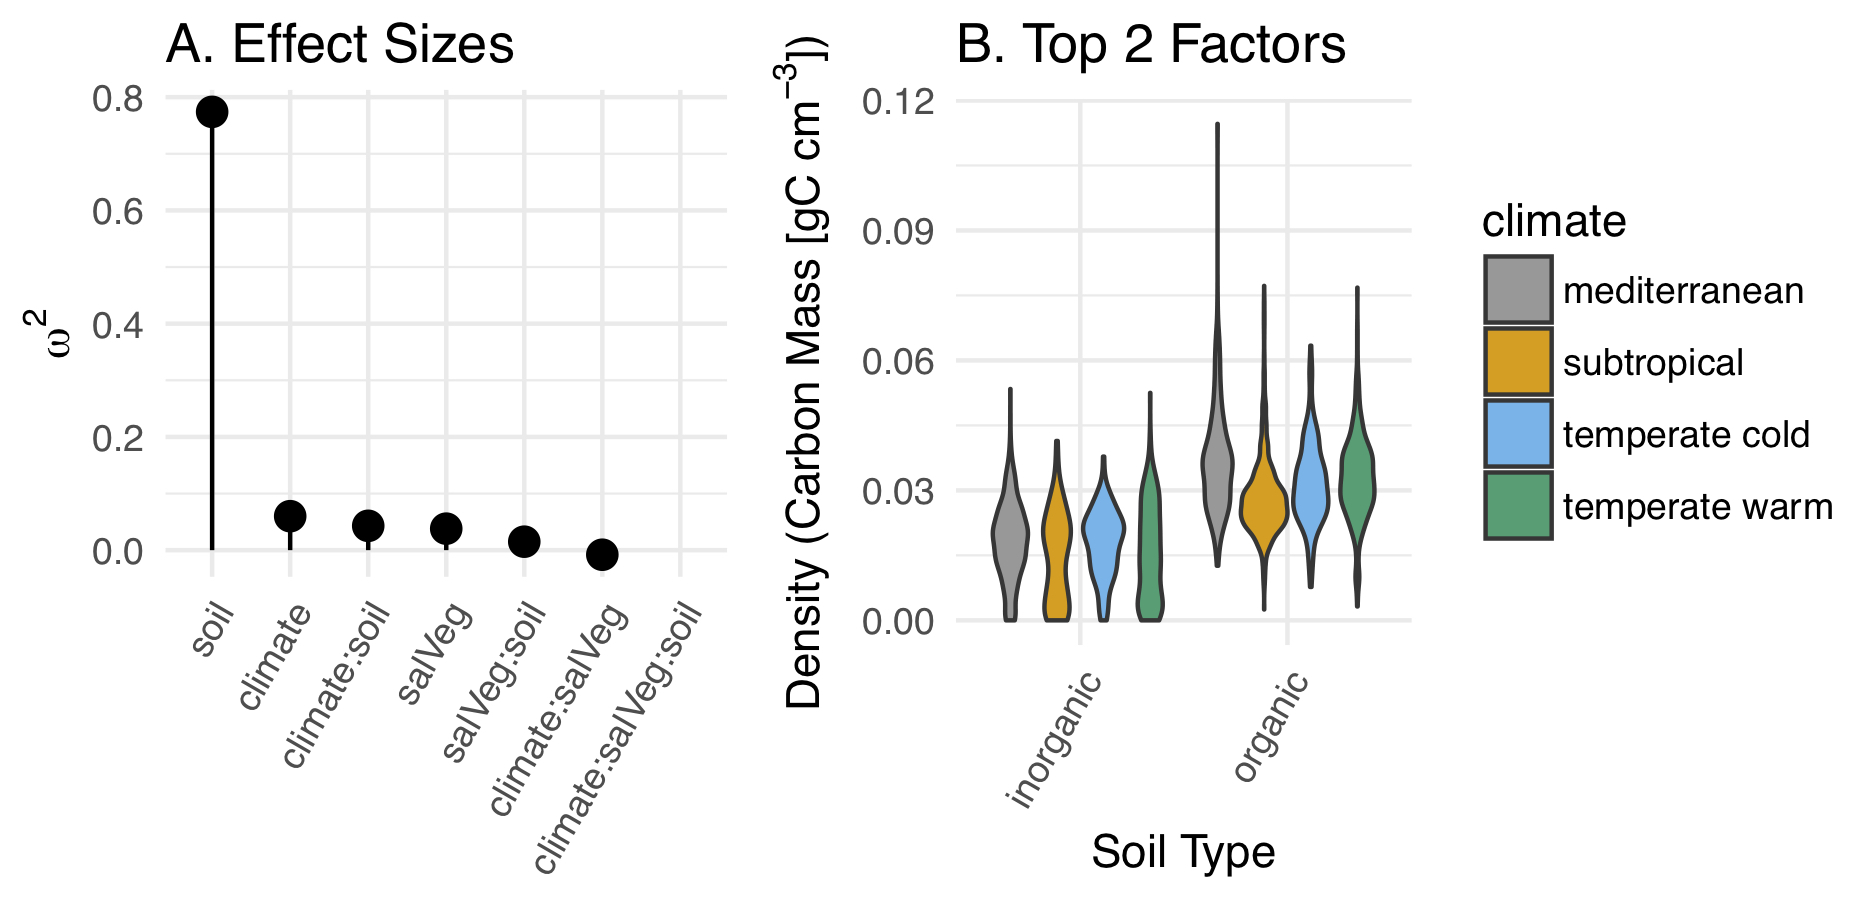 (A) Adjusted effect sizes (ω2) for each fixed effect in model 1. (B) Probability density for carbon stocks across soil type and climate, the two factors with the greatest effect sizes in model 1.